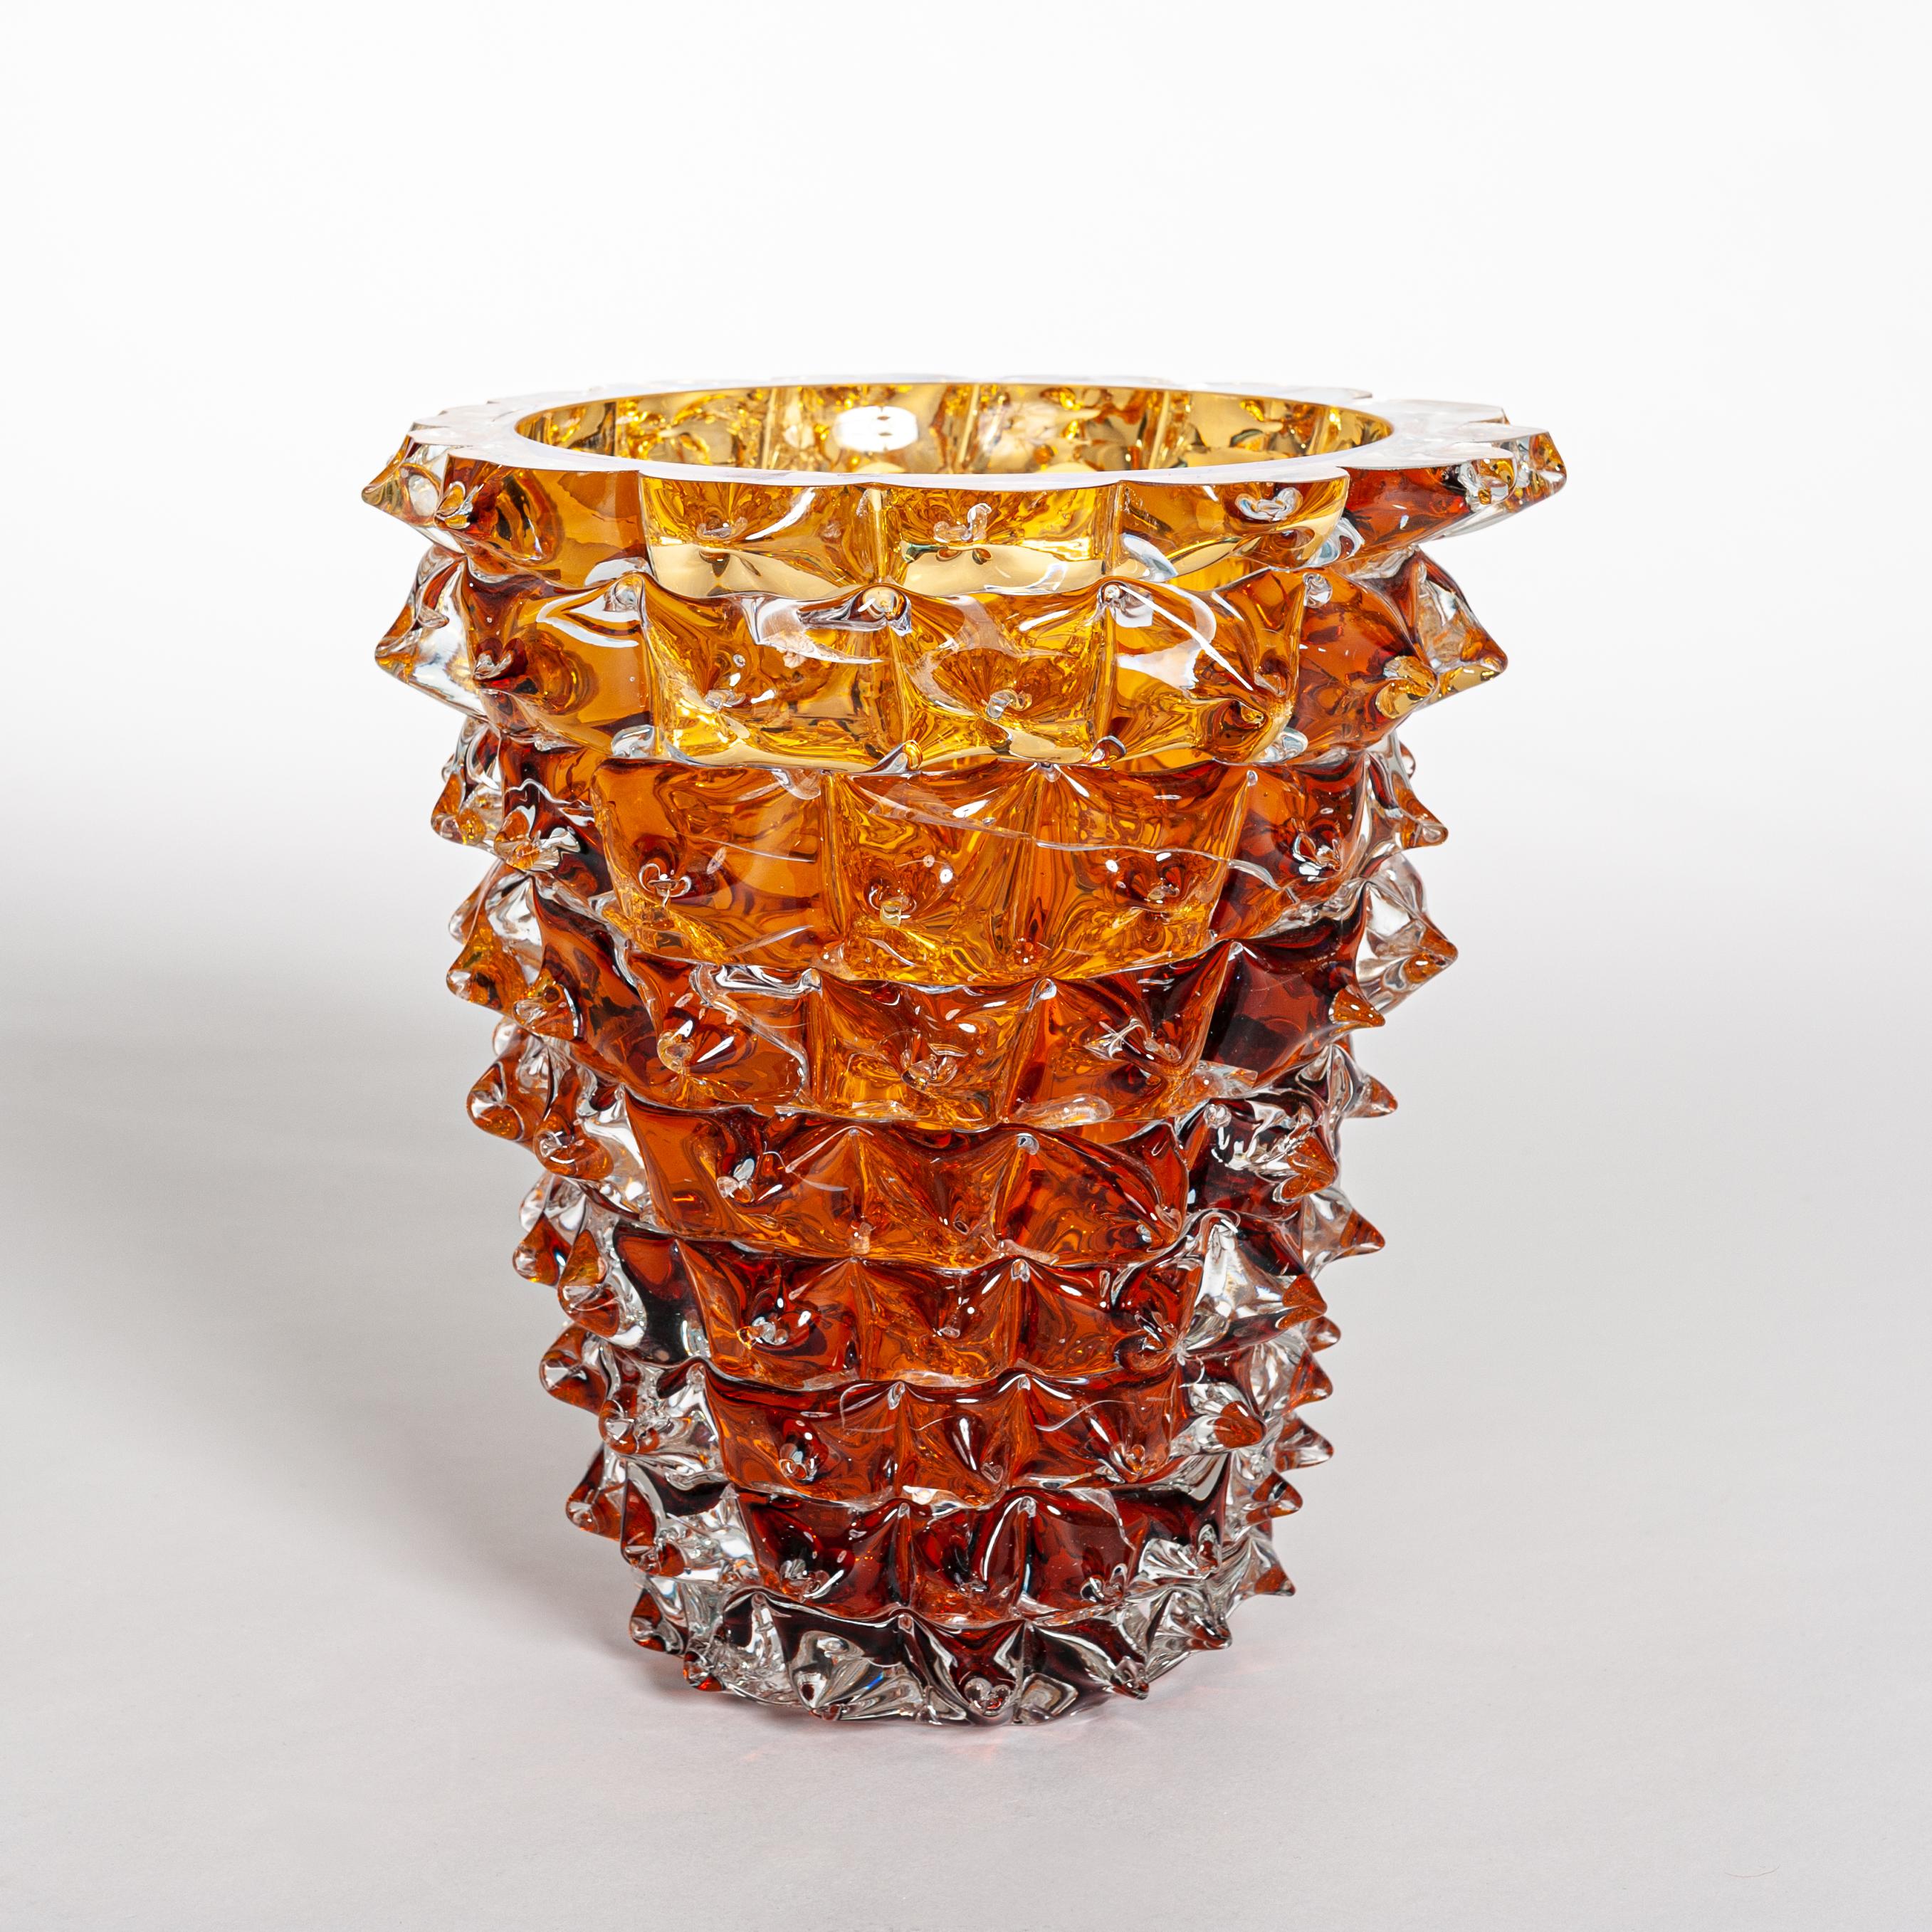 Pair of Amber Colored Vases in Murano Glass with Spikes Decor, Signed Costantini 3